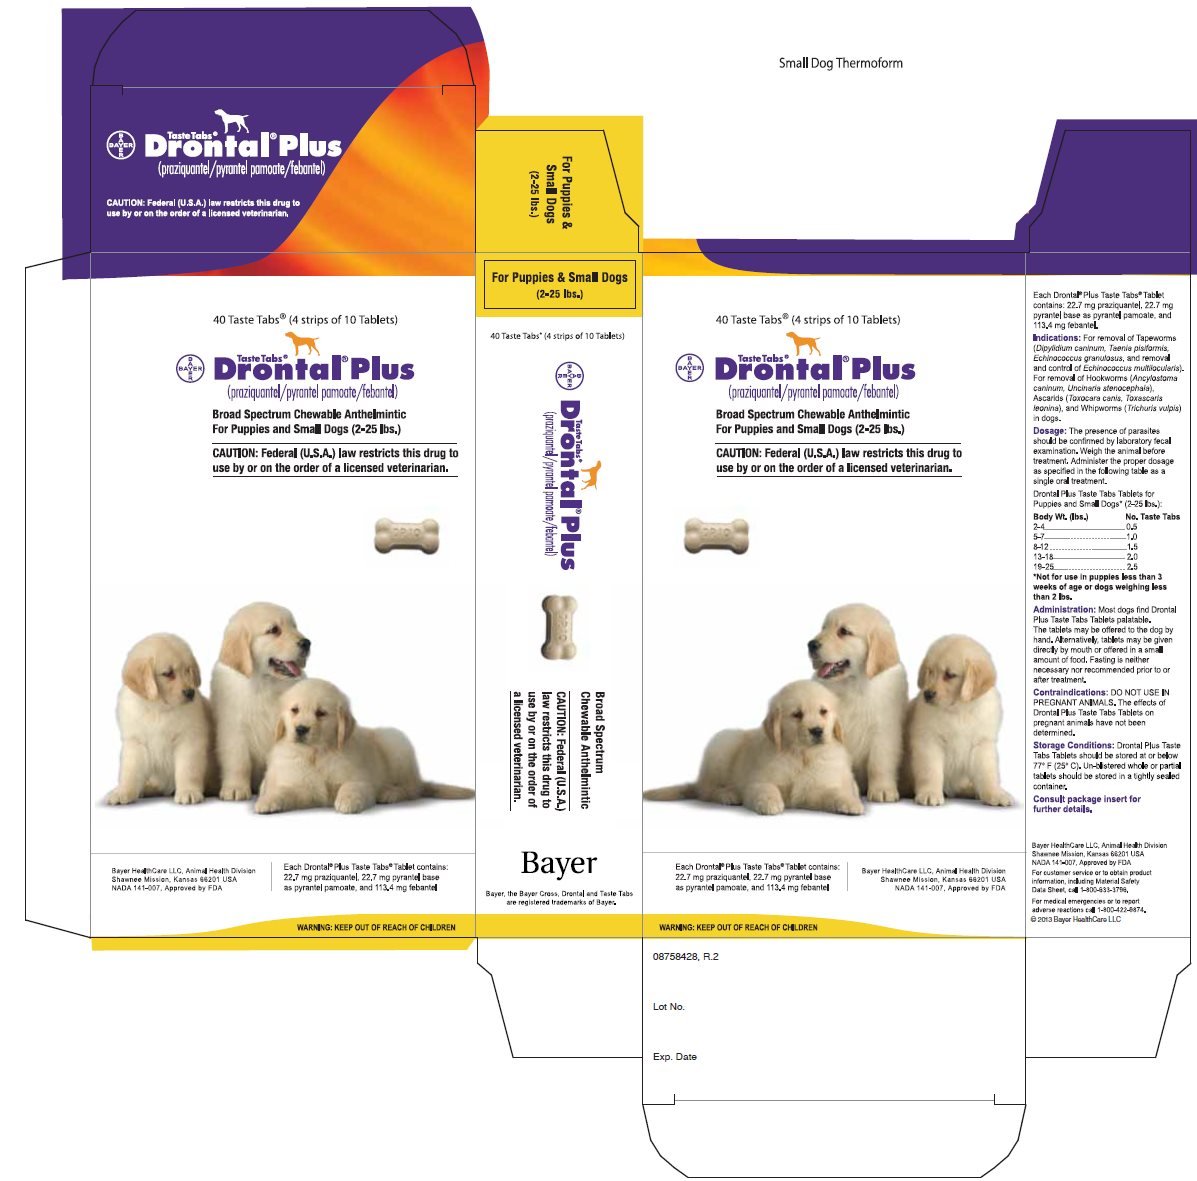 Drontal Plus Taste Tabs for Small Sized Dogs (2-25 lbs.) label